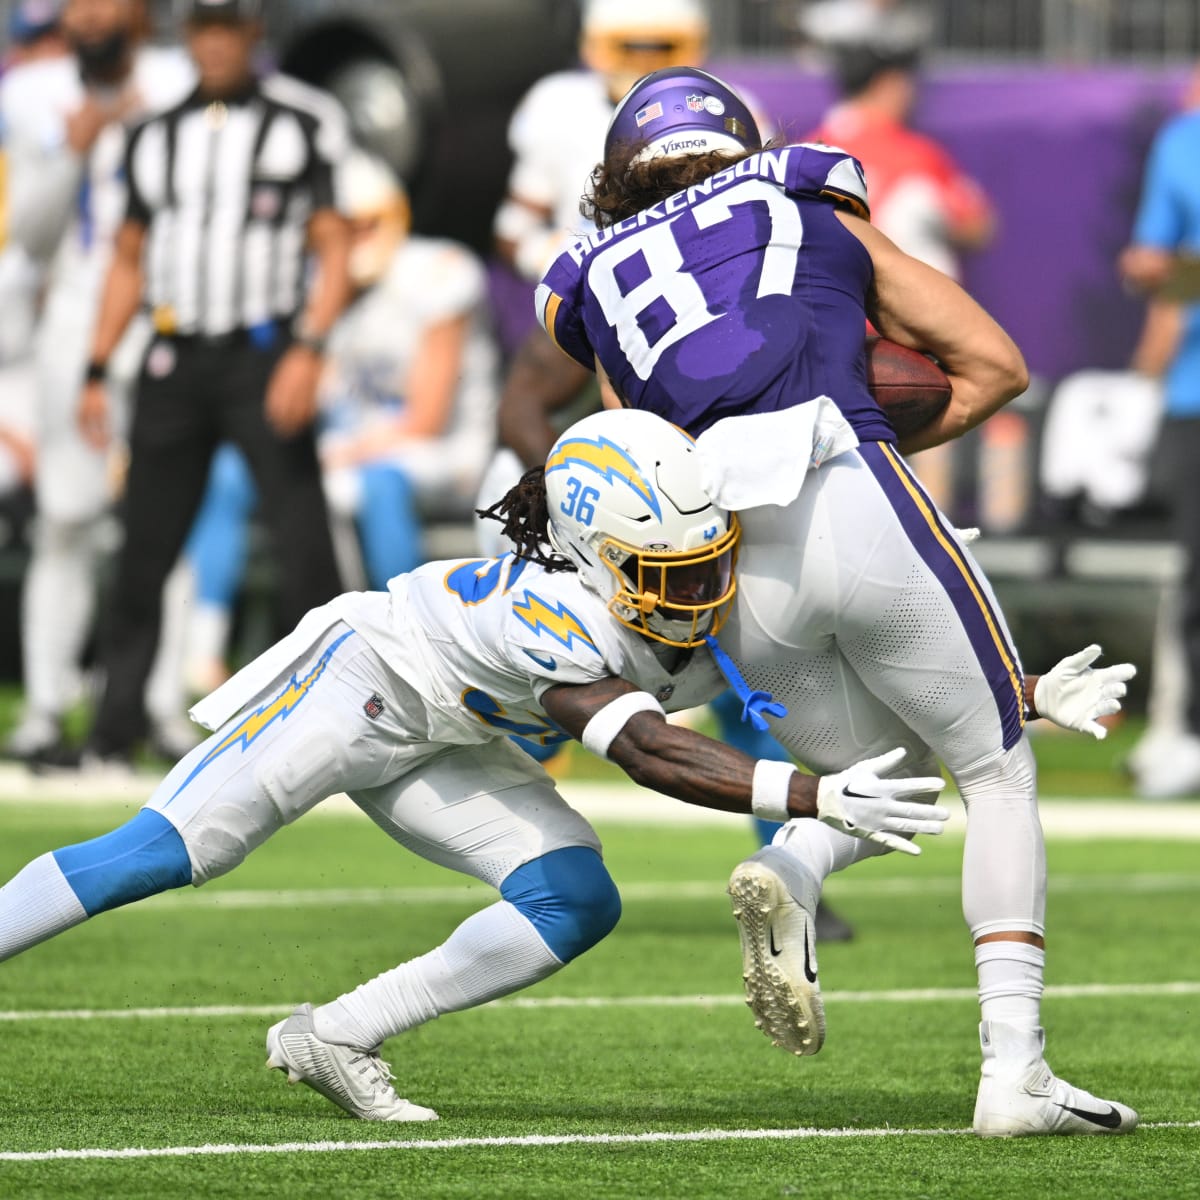 Chargers loss still eats at Vikings as they look to move forward